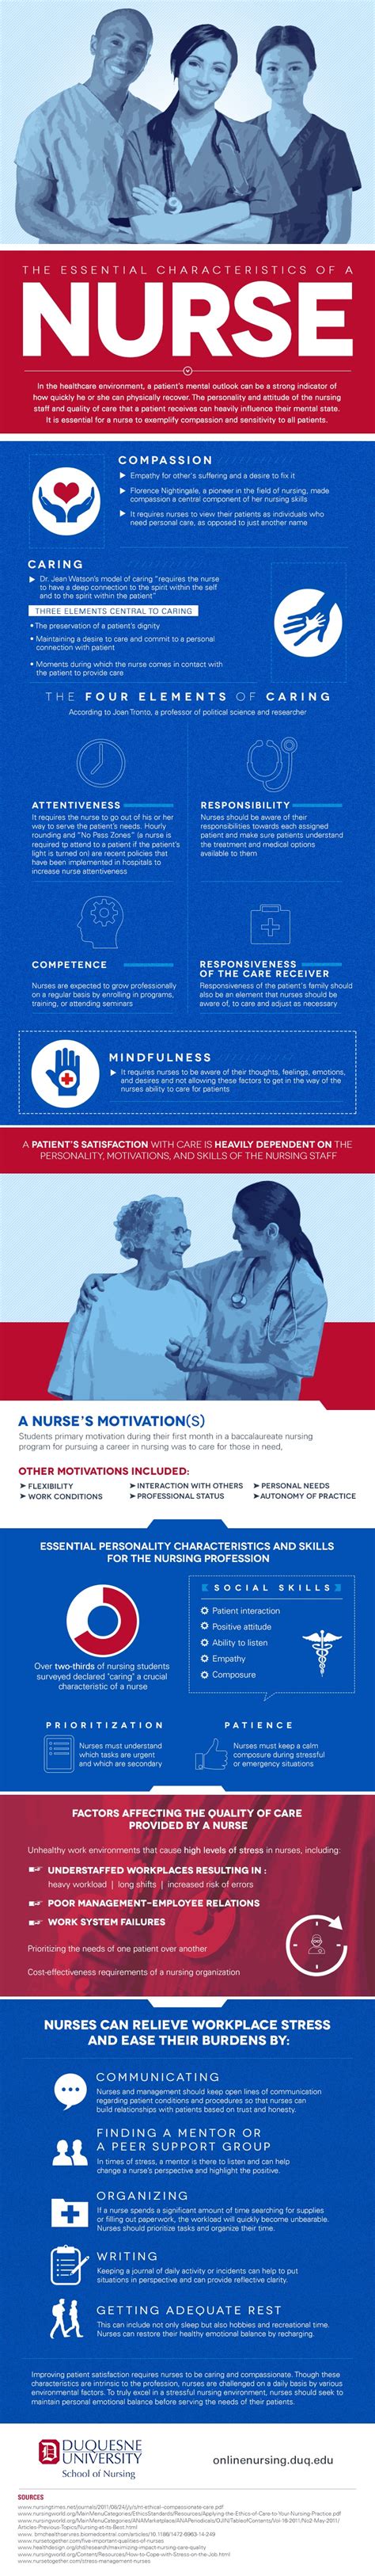 This question has been the subject of discussion for a number of years. The Essential Characteristics of a Nurse